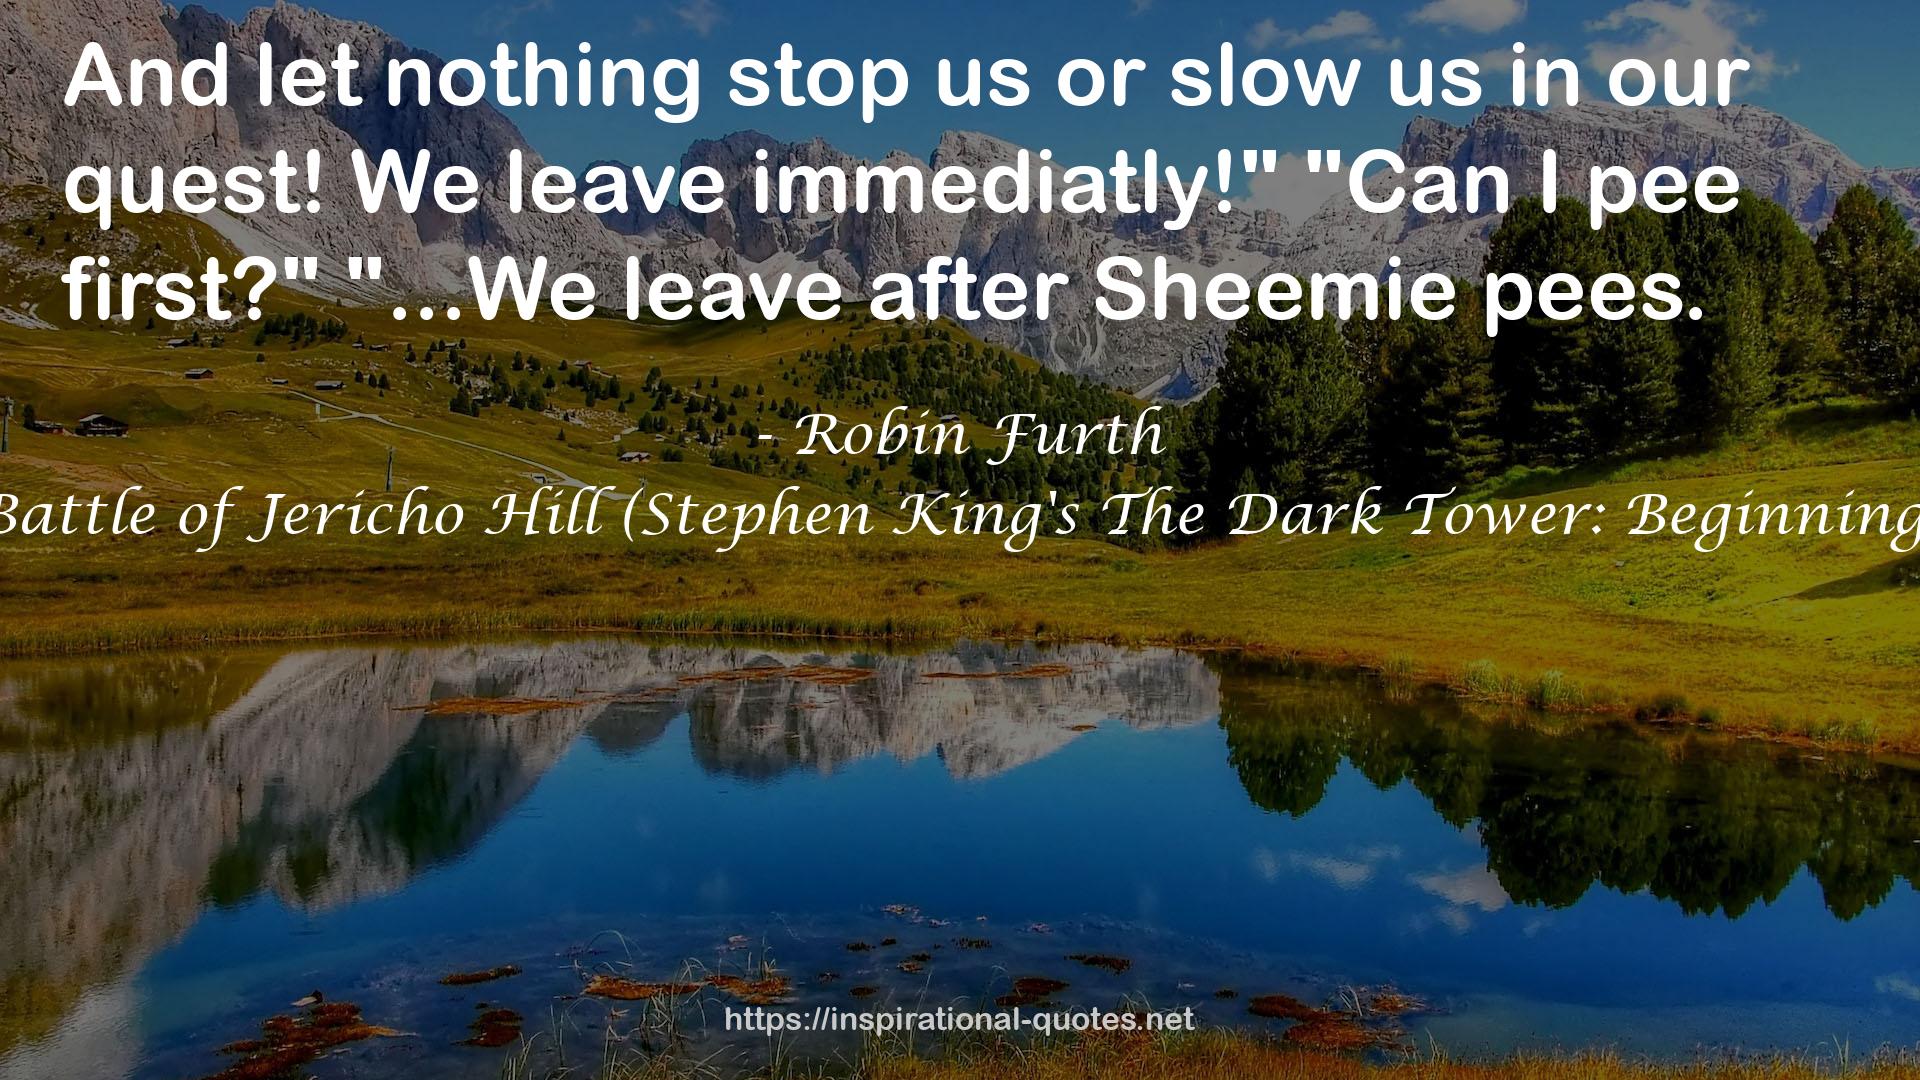 The Battle of Jericho Hill (Stephen King's The Dark Tower: Beginnings, #5) QUOTES